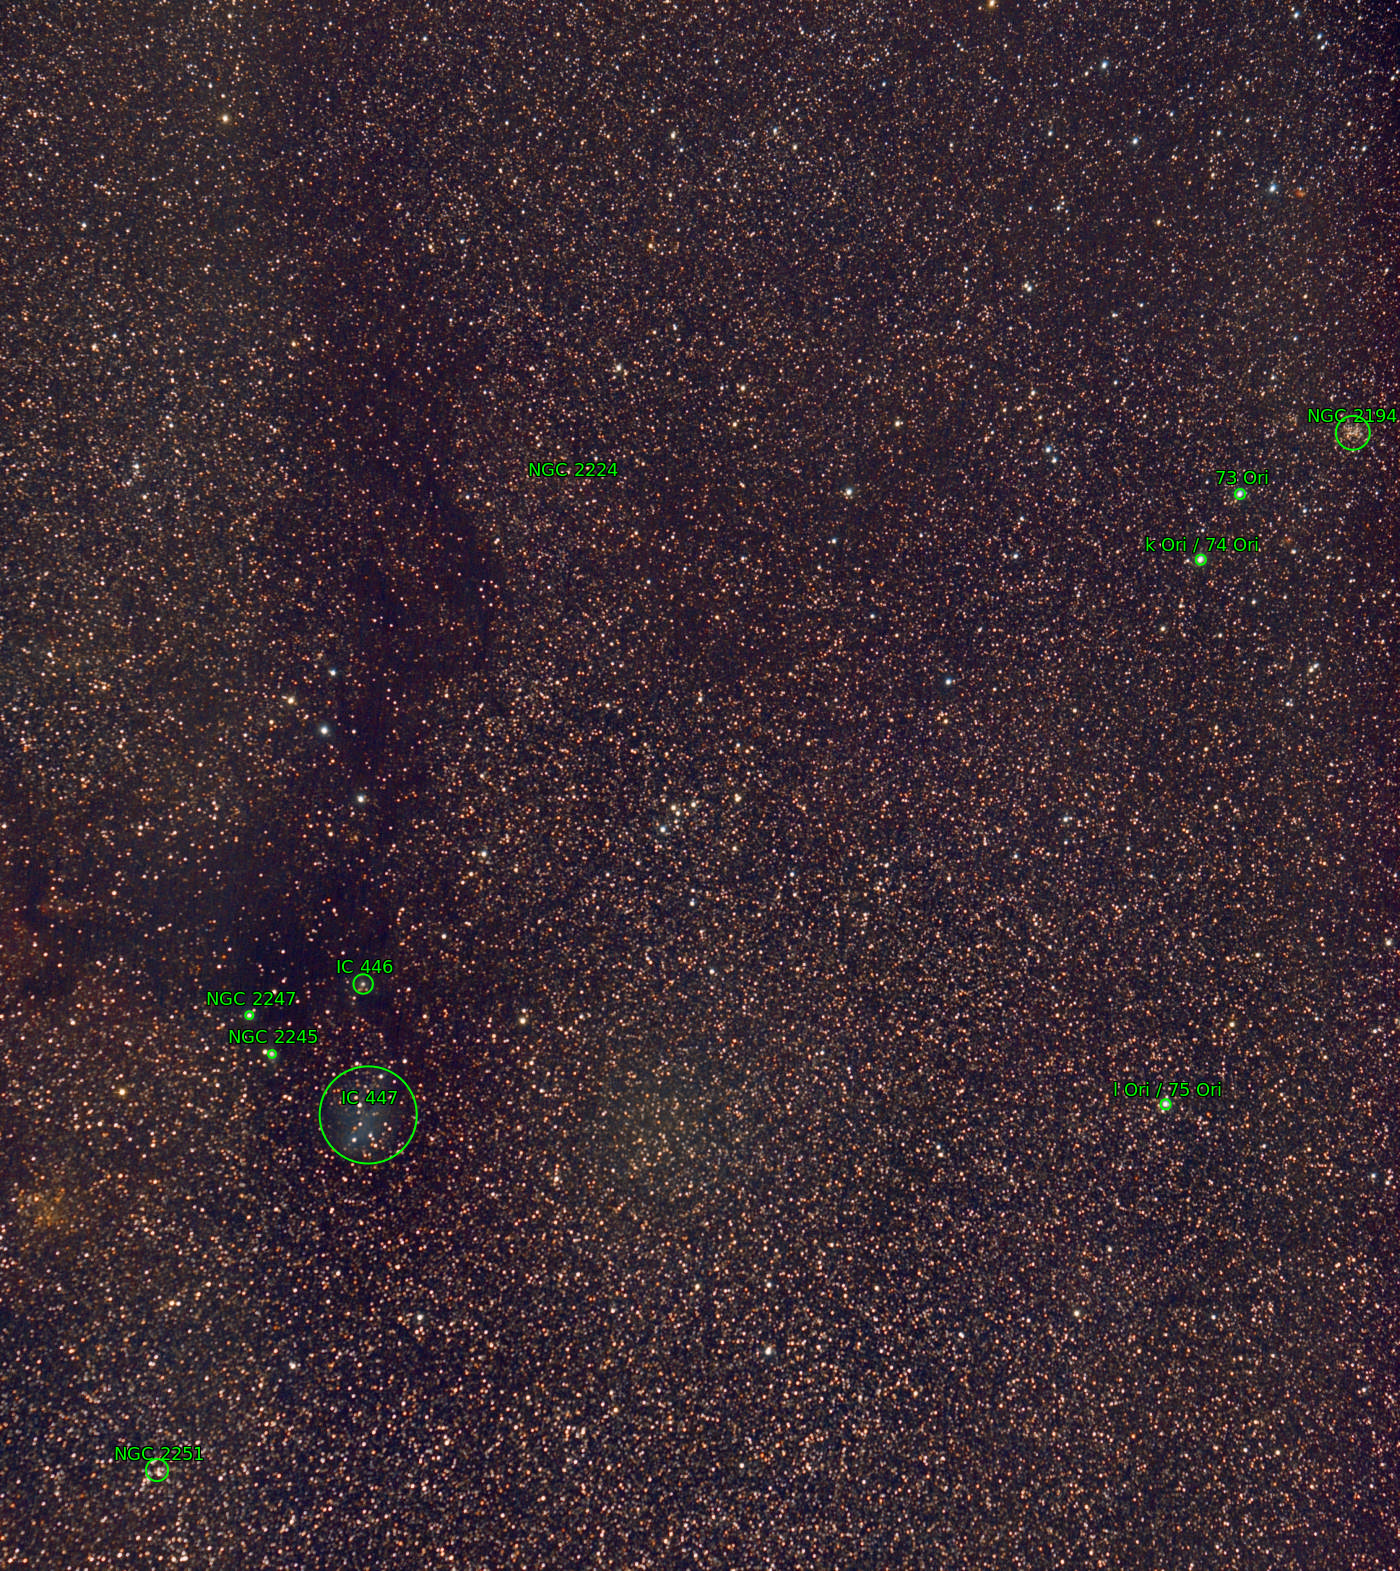 Unicorn widefield; Samyang 135mm; from February 3rd 2019; 110x30sec; annotated